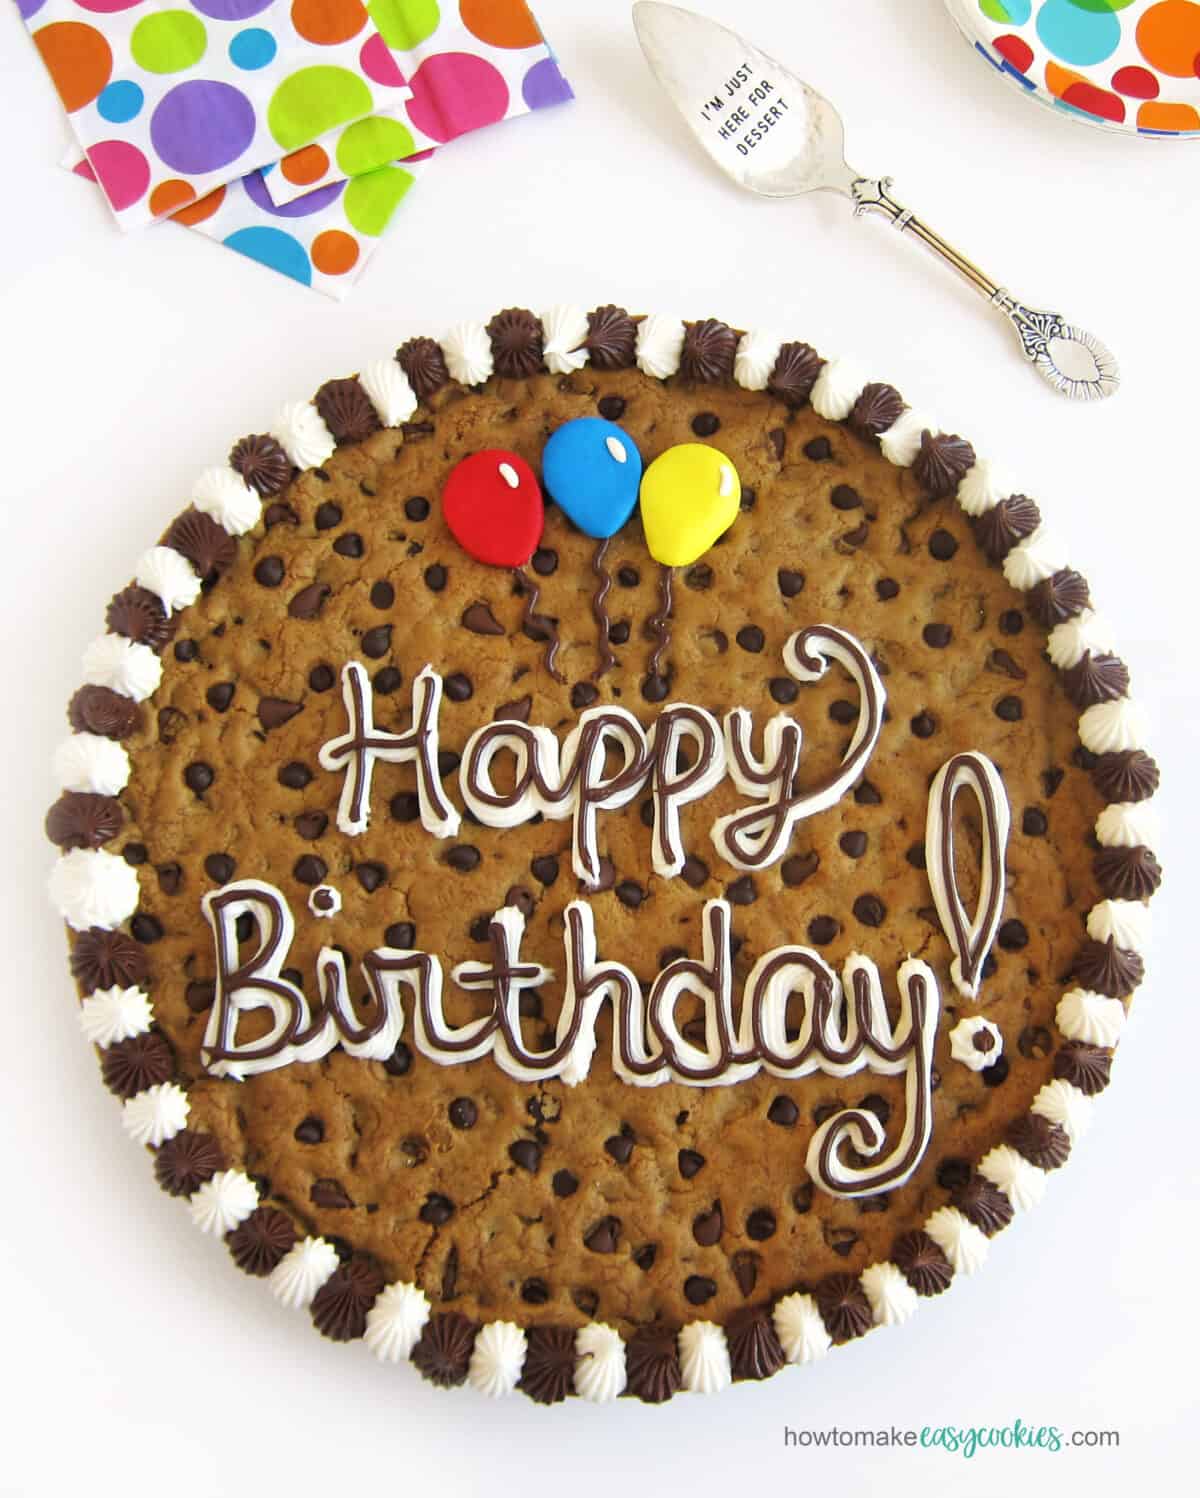 Chocolate chip birthday cookie cake decorated with "Happy birthday" and balloons in frosting.